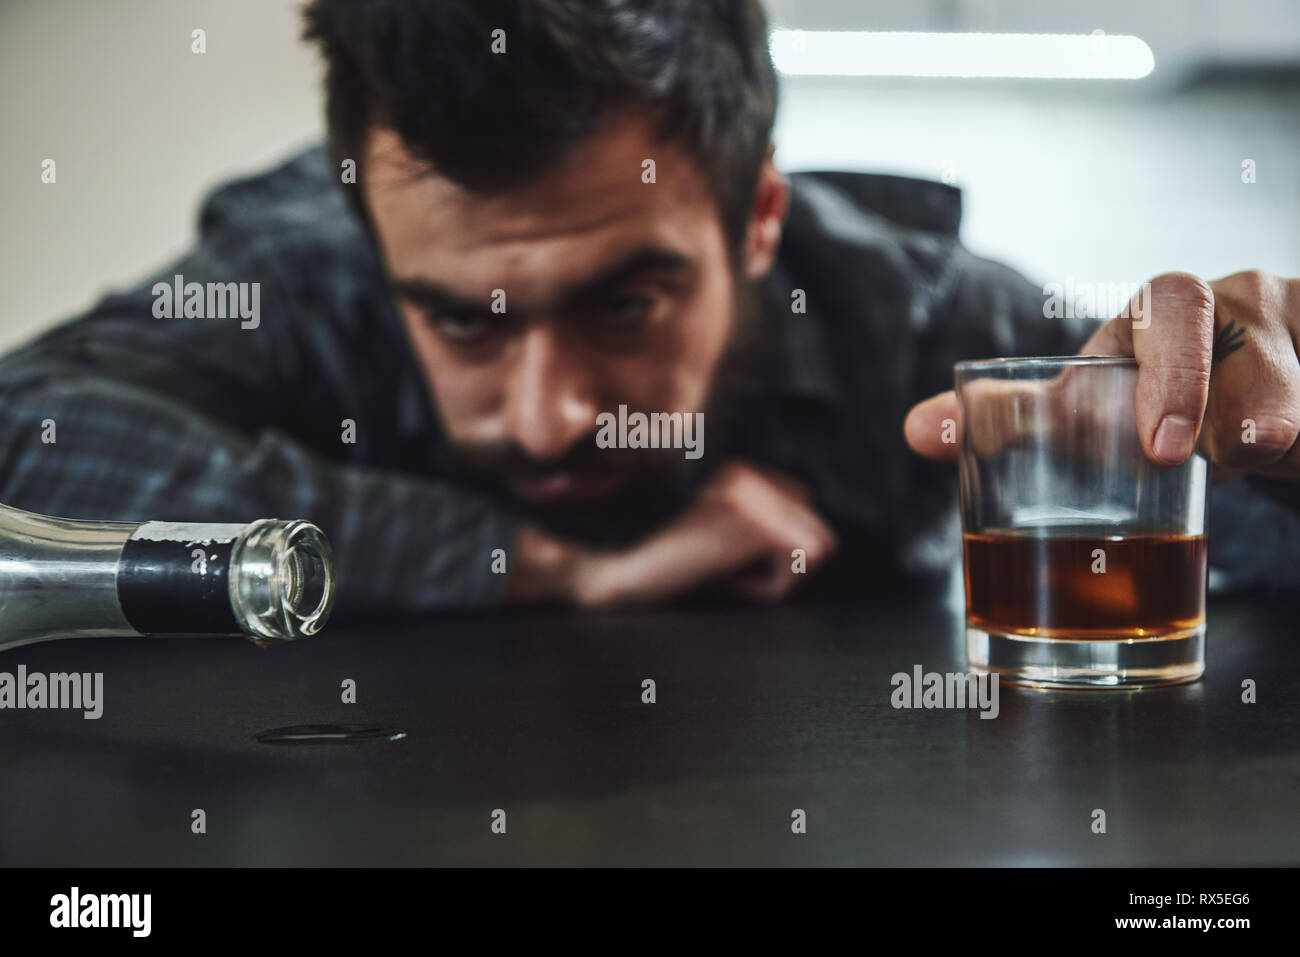 Dark-haired, sad and wasted alcoholic man lying on a table, in the kitchen. He holds a glass of whiskey while looking at empty bottle. Looking depress Stock Photo